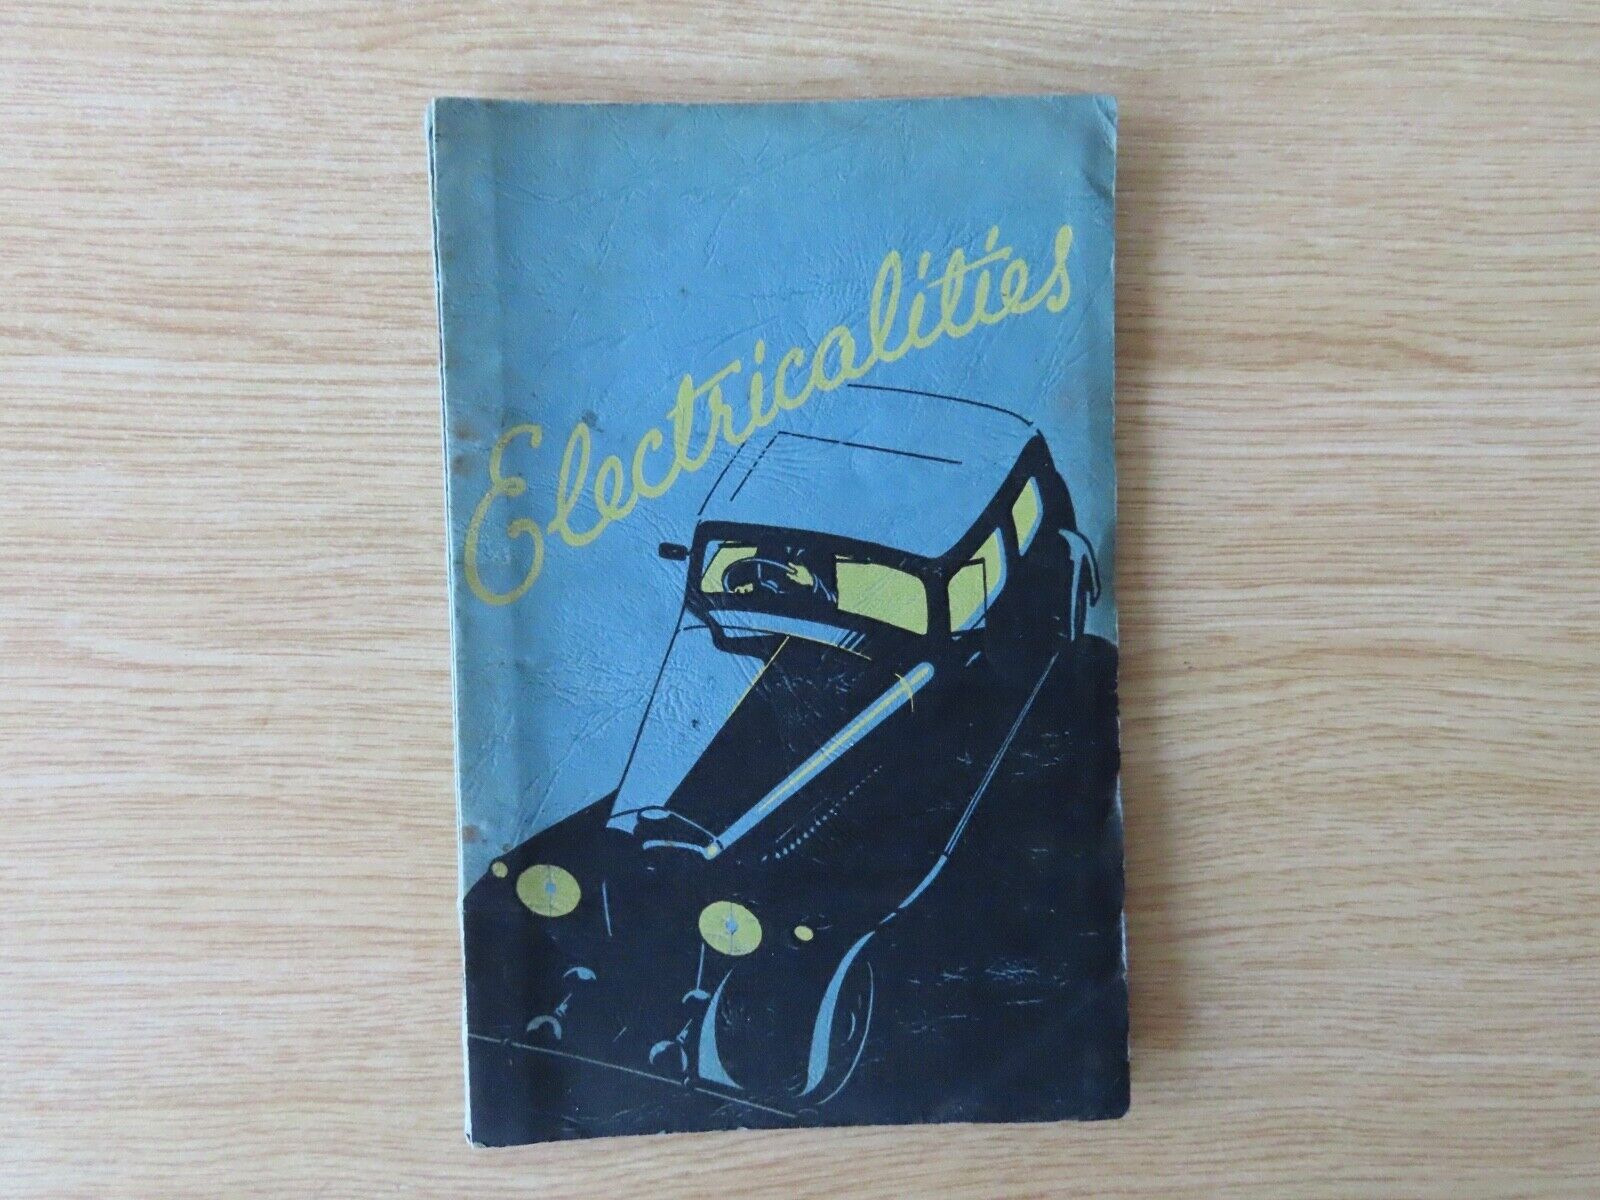 Vintage 1930's Joseph Lucas Electricalities Book, Early Motoring History, Lamp